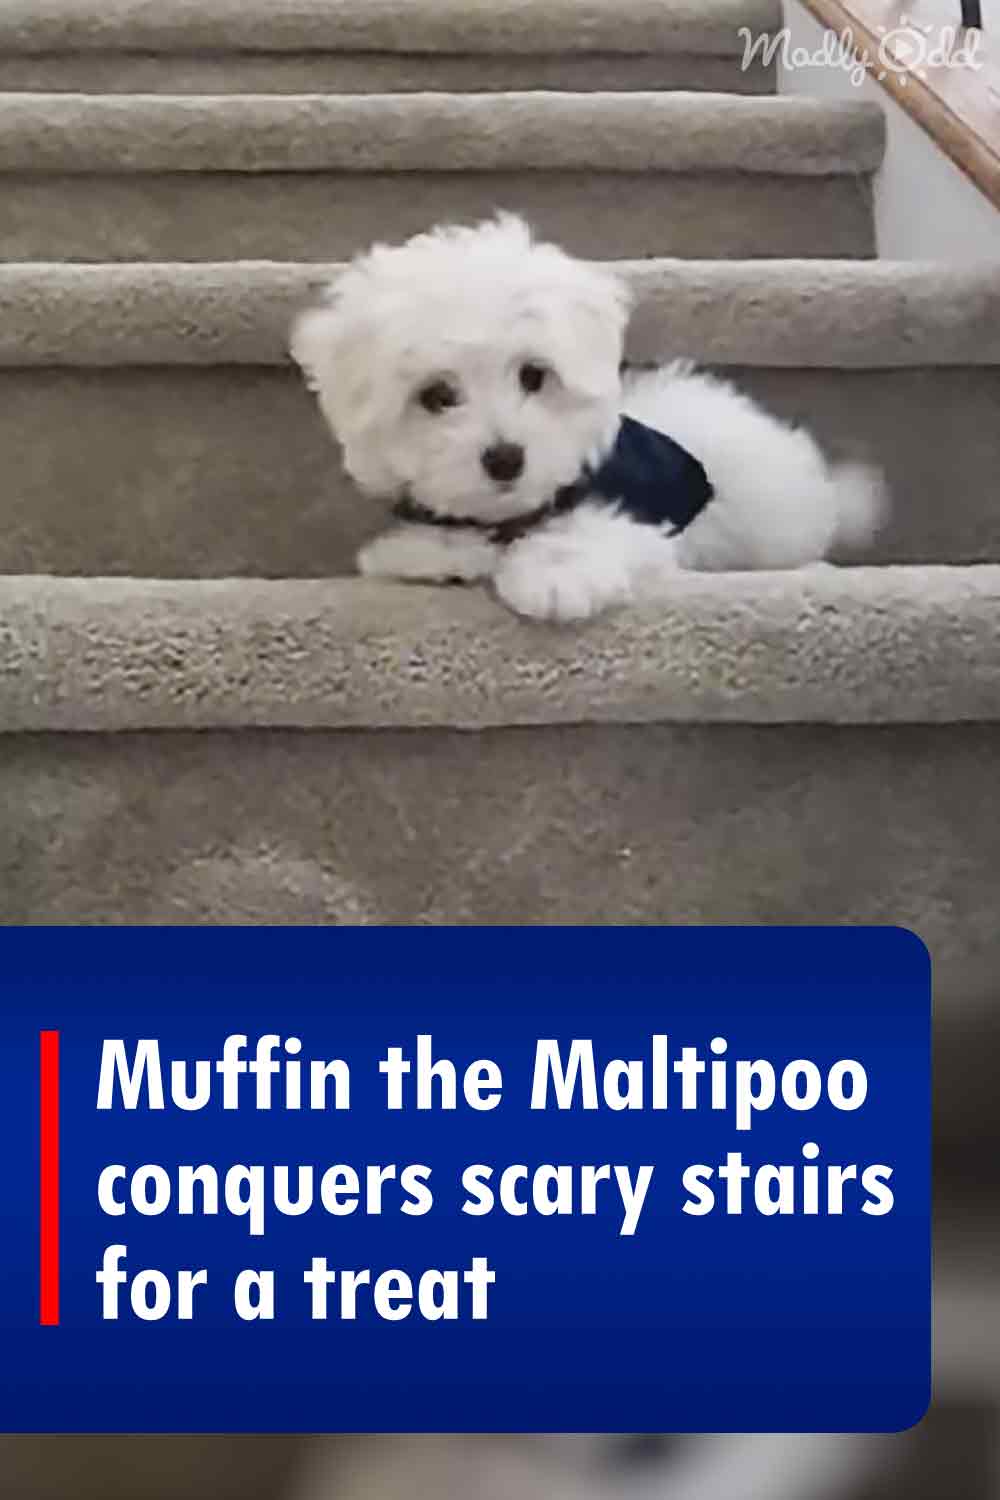 Muffin the Maltipoo conquers scary stairs for a treat